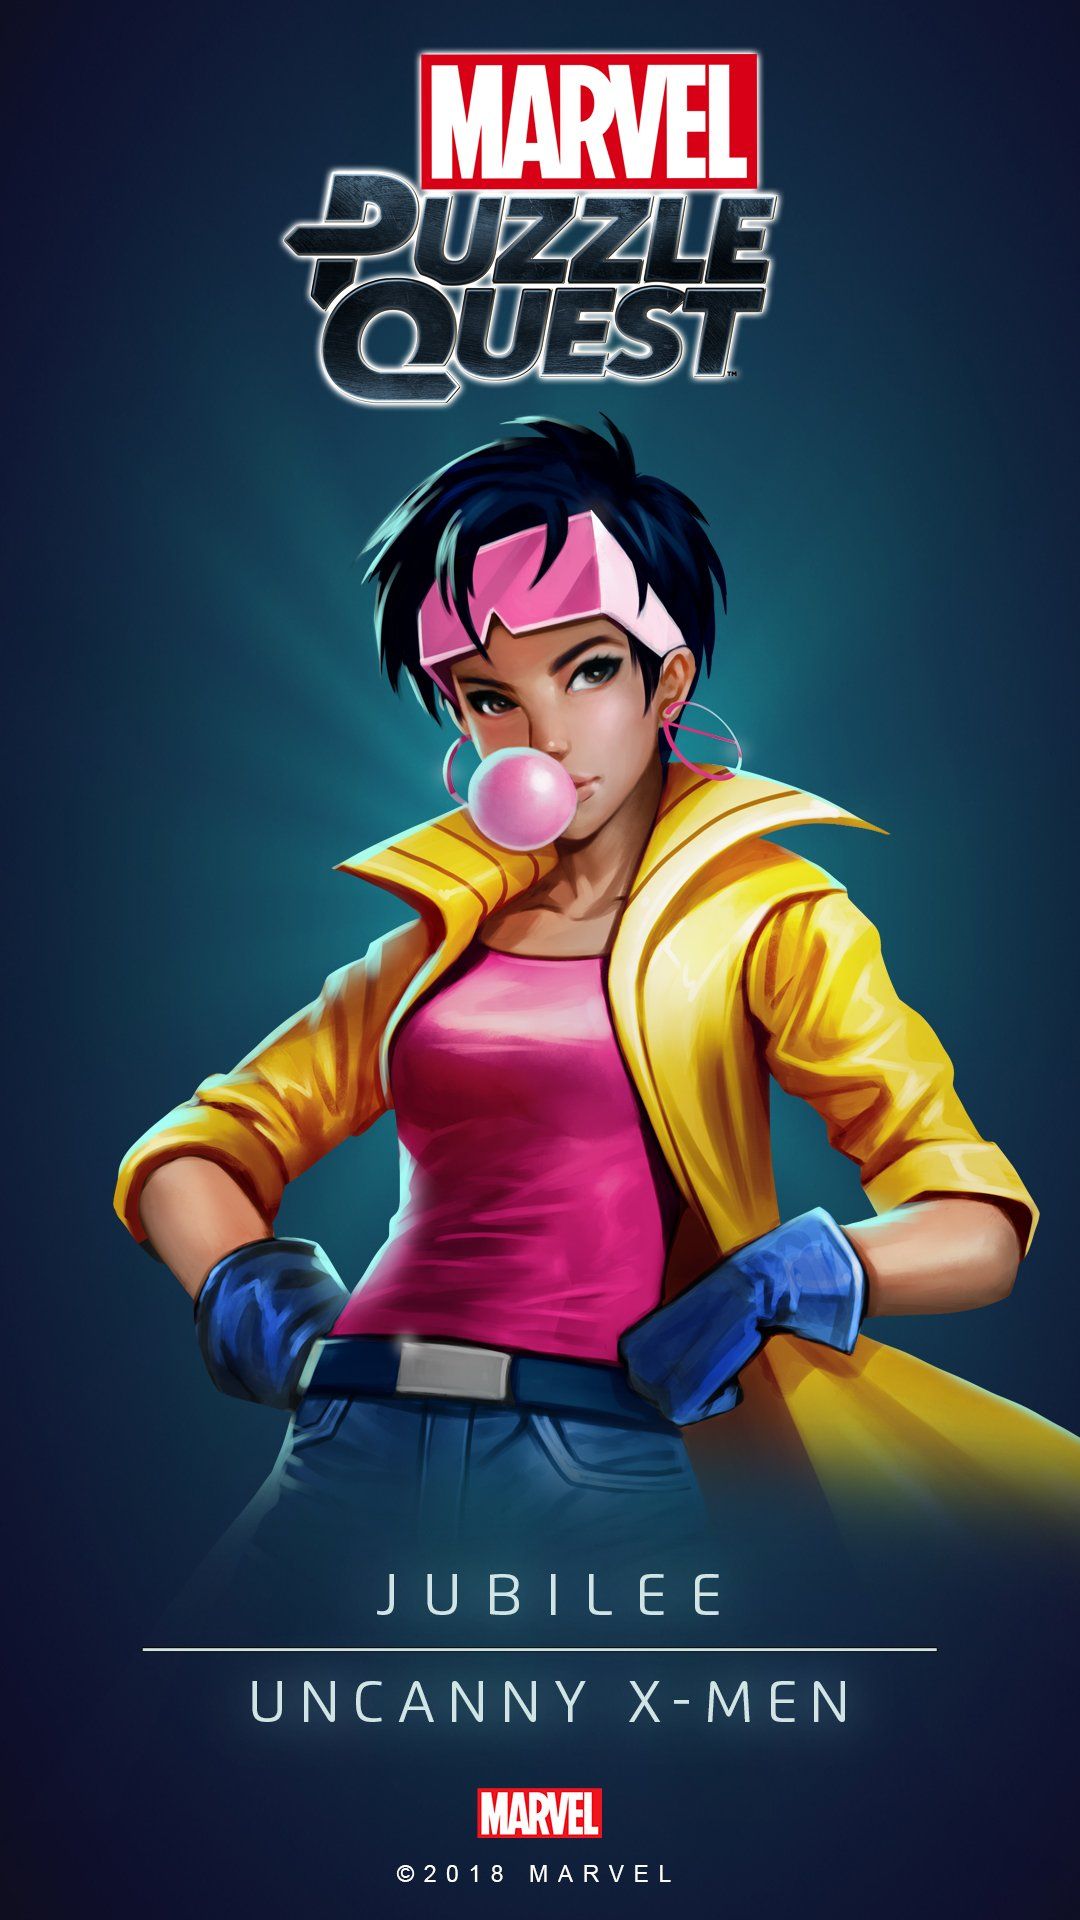 Marvel Puzzle Quest up your mobile display with these awesome Jubilee wallpaper! #MarvelPuzzleQuest